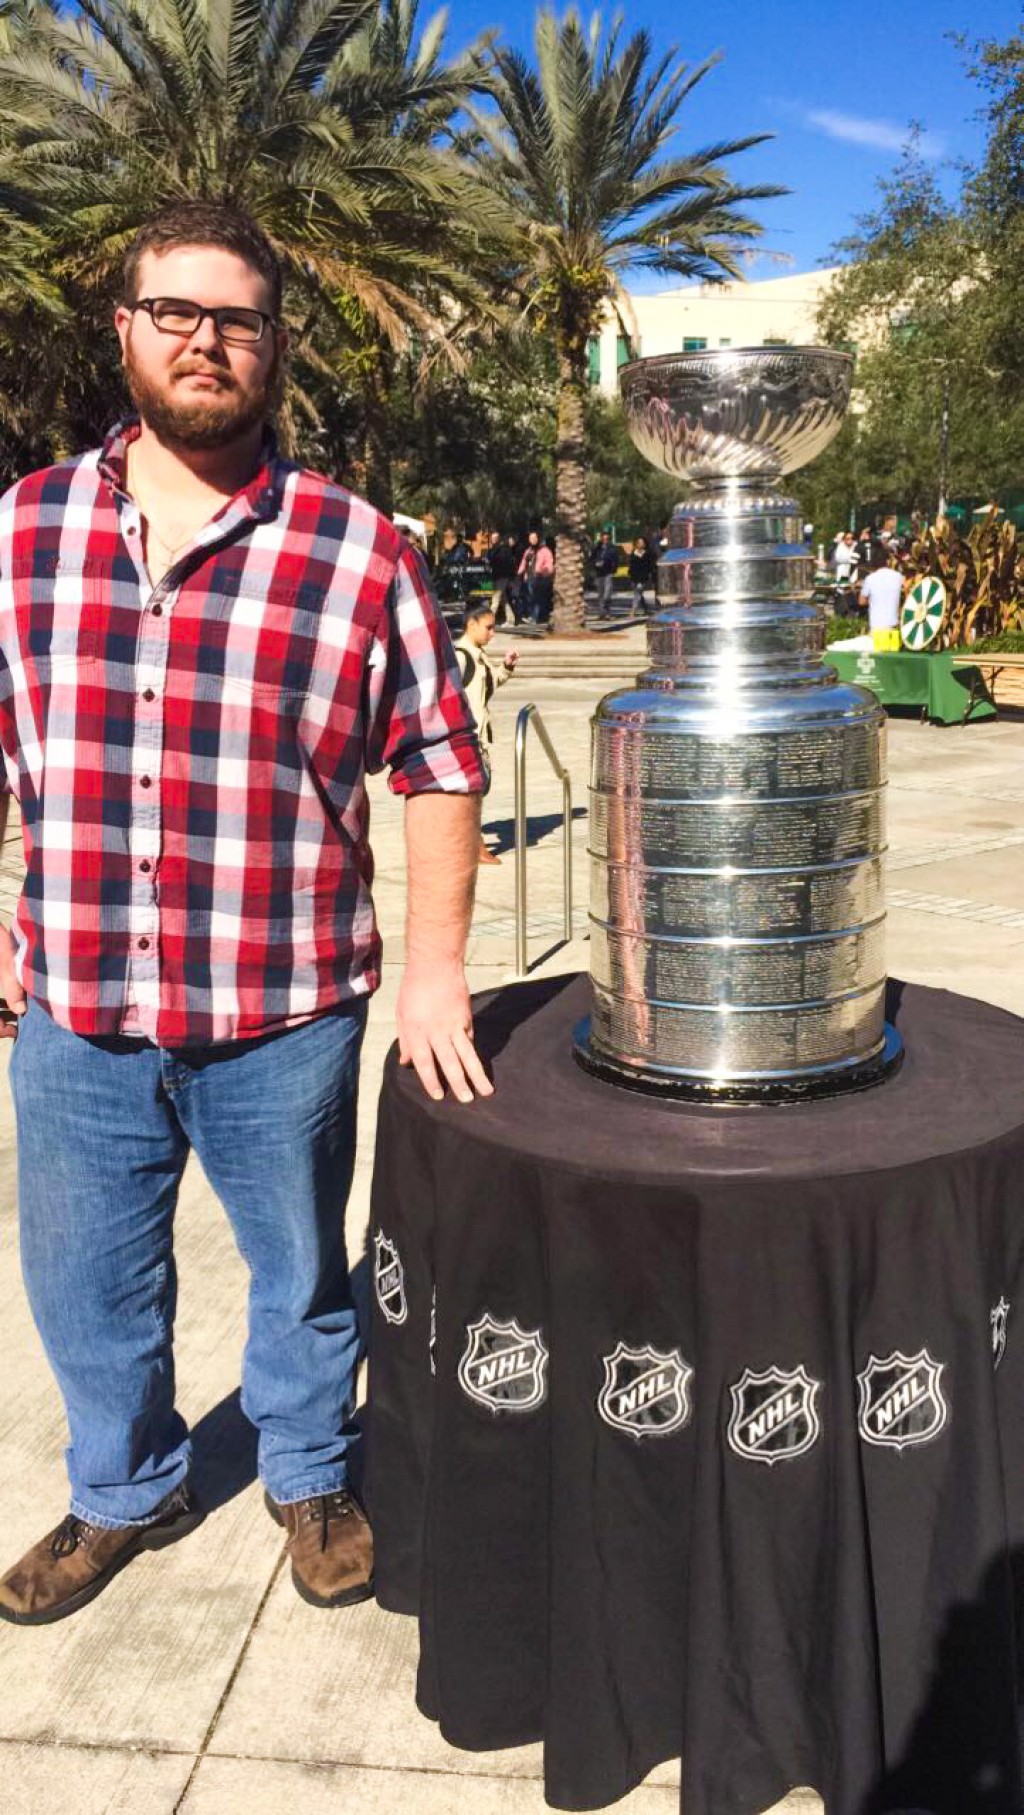 NHL’s Stanley Cup makes cameo at USF’s Bull Market